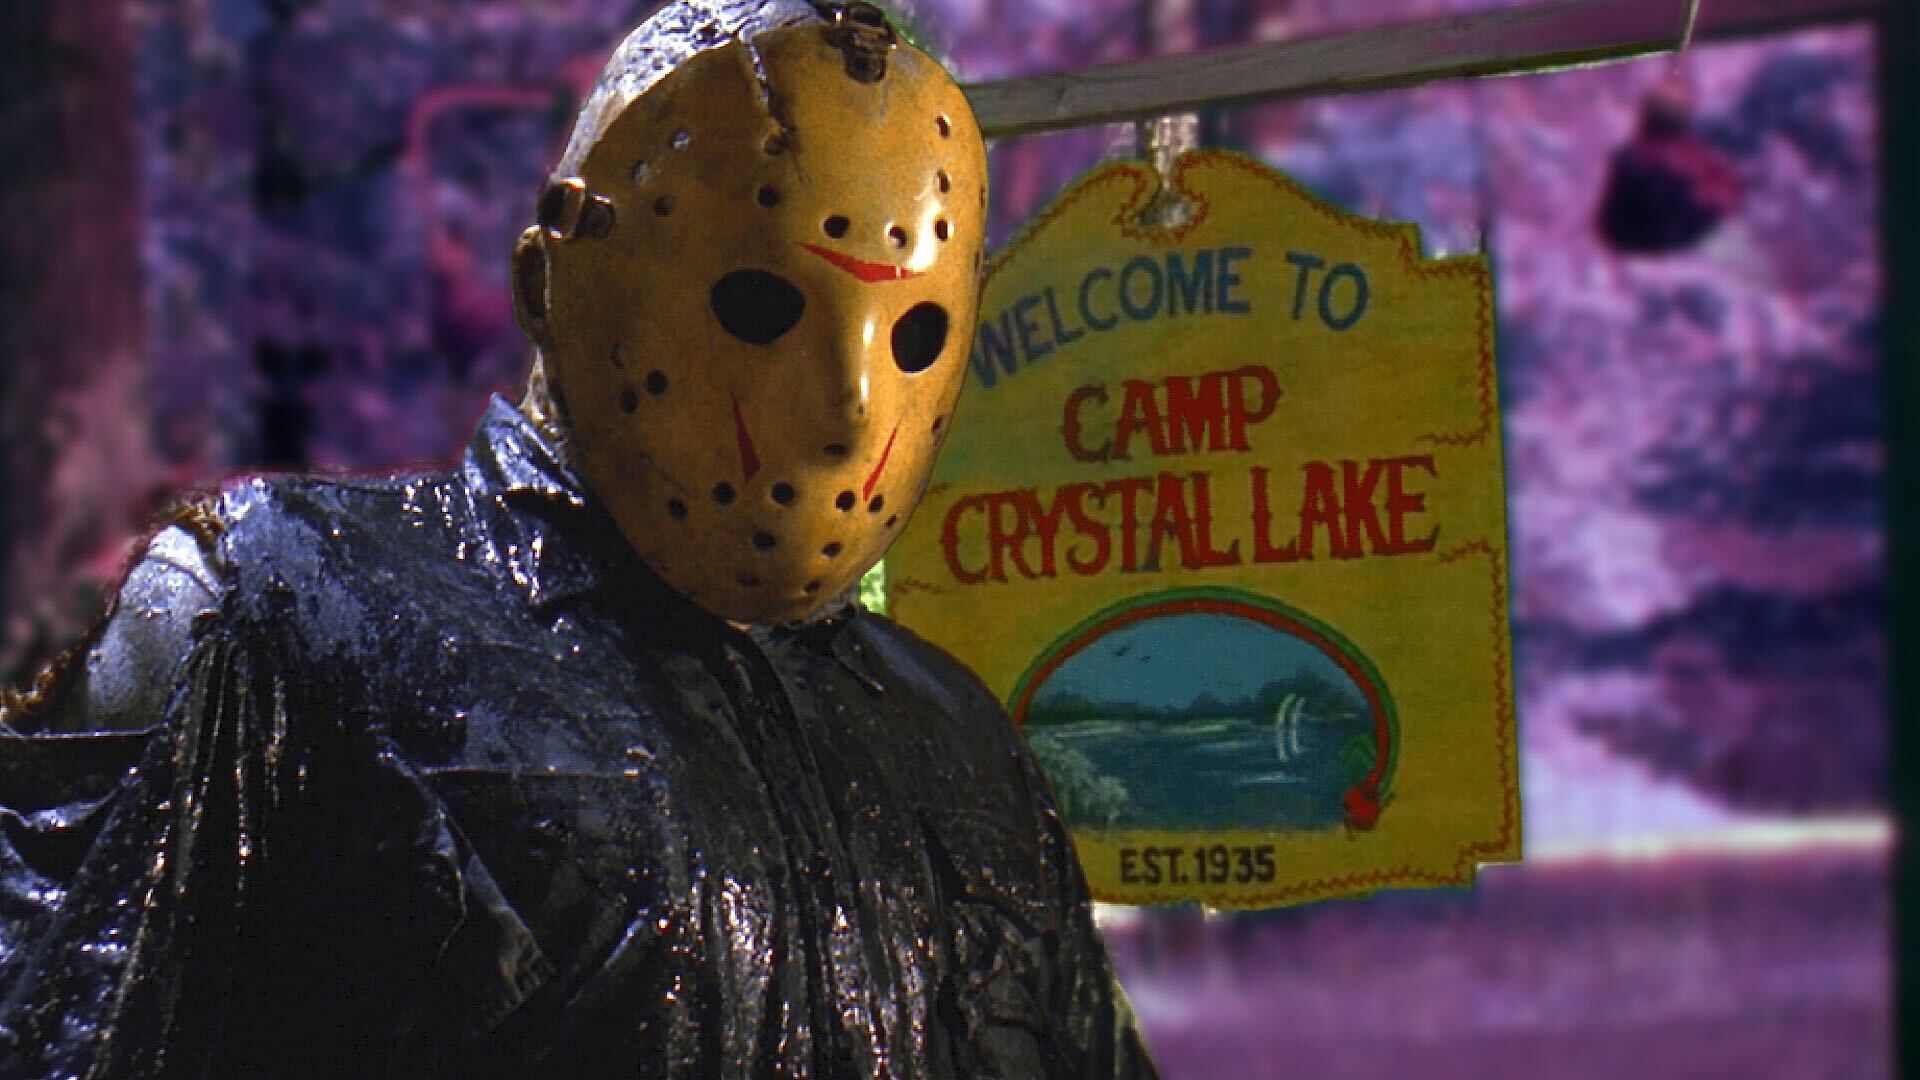 Jason Voorhees in front of a Crystal Lake sign from Friday the 13th